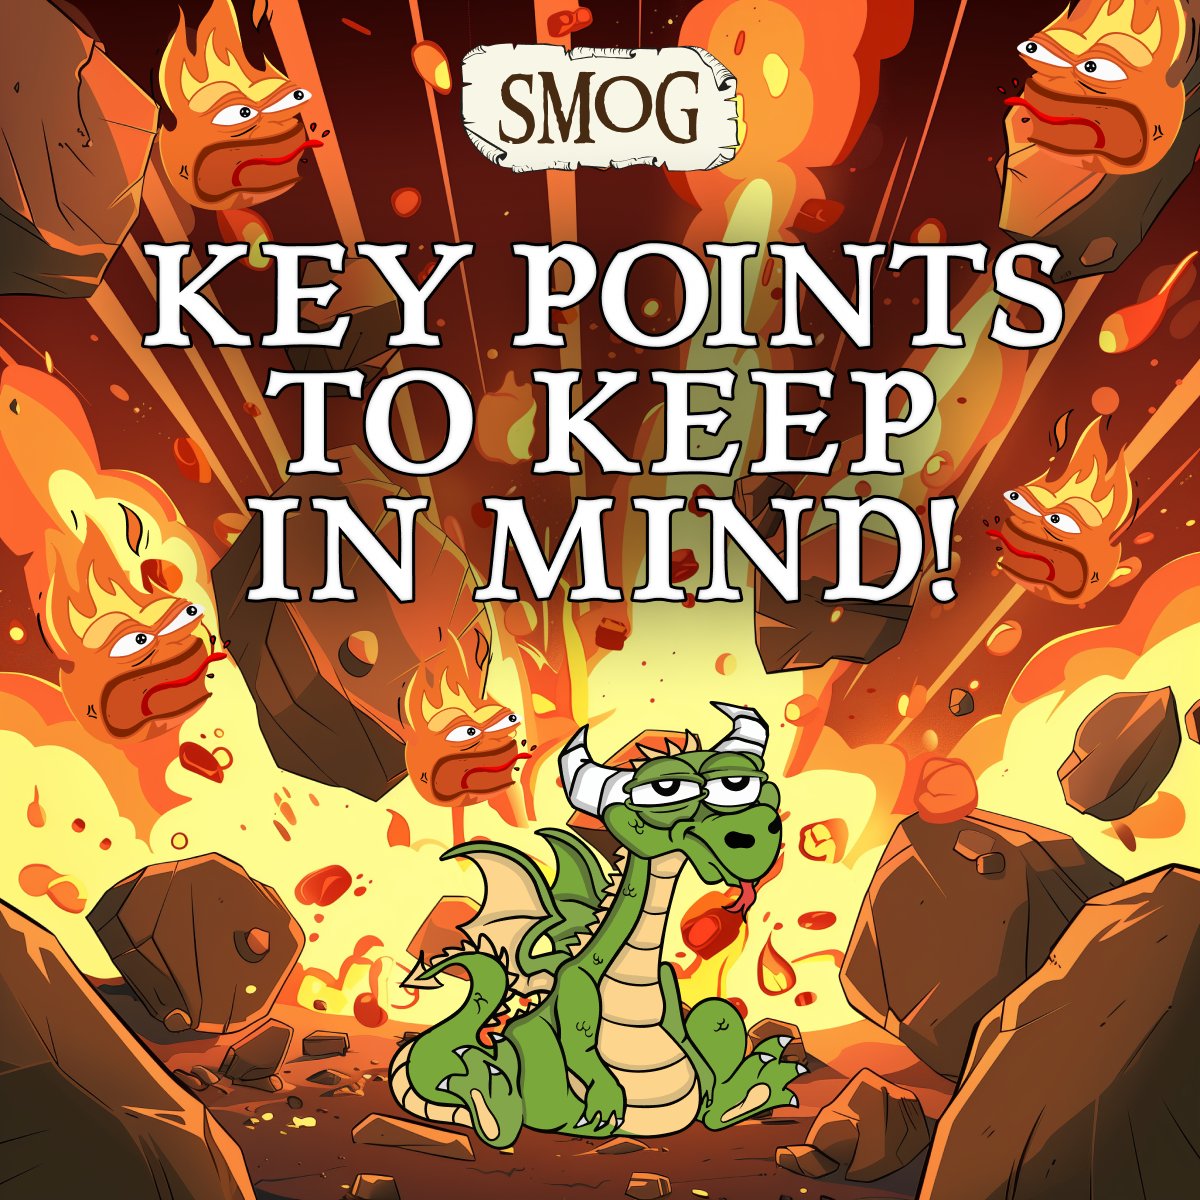 Key points to keep in mind as #SMOG Season 2 #Airdrop soars! 🚀 Trade $SMOG for maximum XP gains! 🐲 Don't forget, you can also earn some XP through completing challenges on @zealy_io! 🎮 ➡️ bit.ly/SmogAirdrop 🪂 #SmogSwap #TradeSmog #Solana #Binance